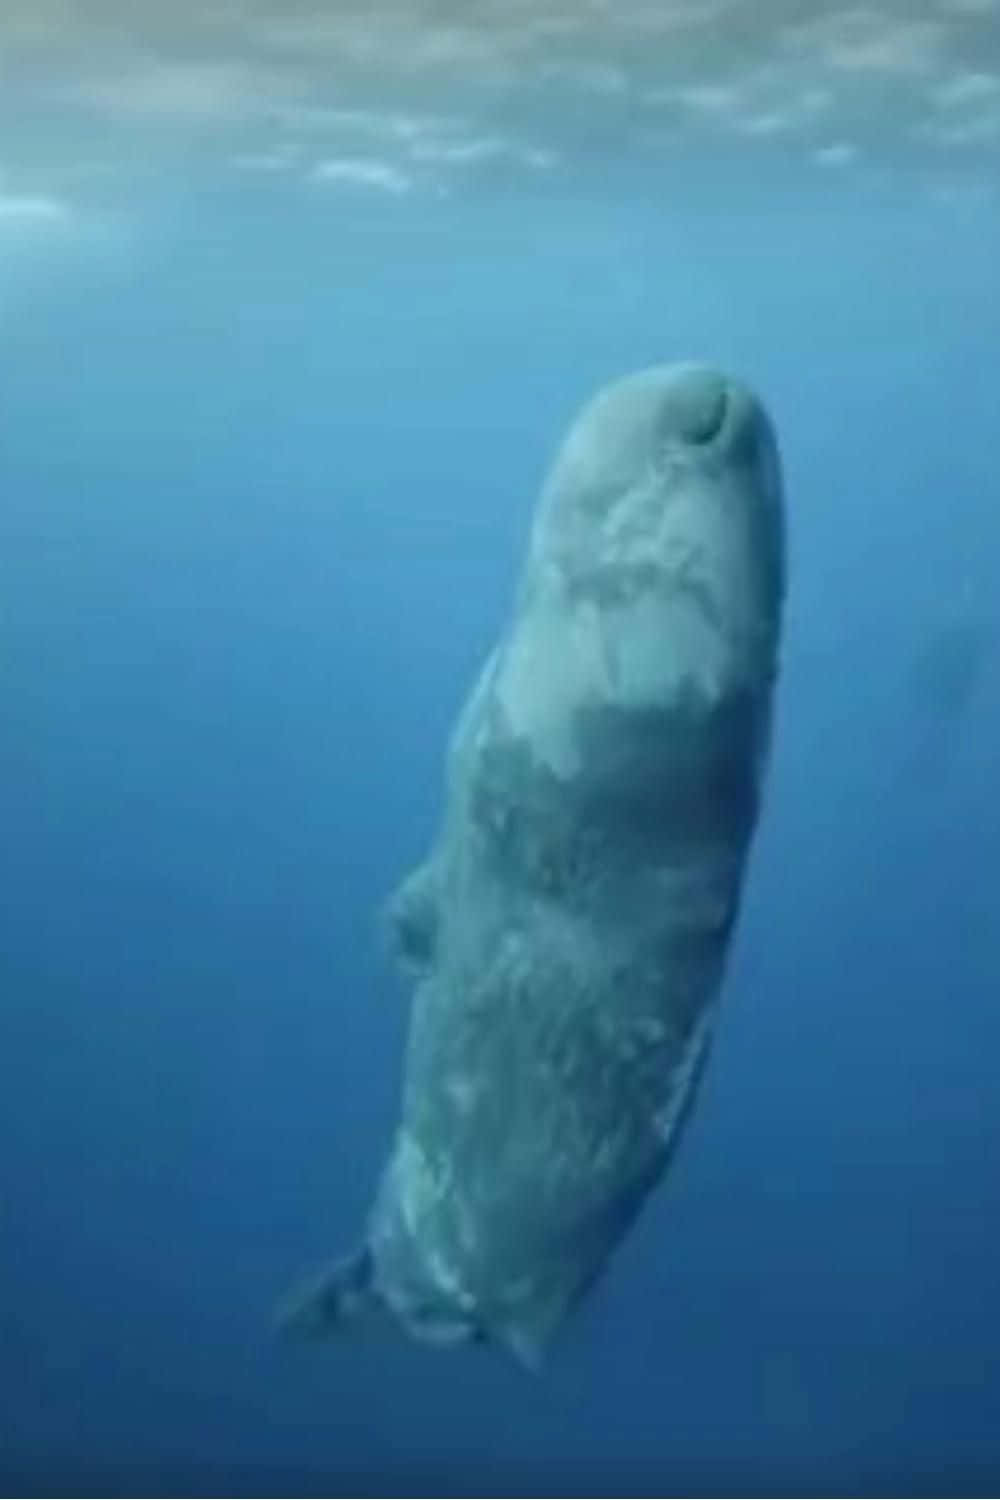 Sea Giants - A Close Look At A Majestic Sperm Whale